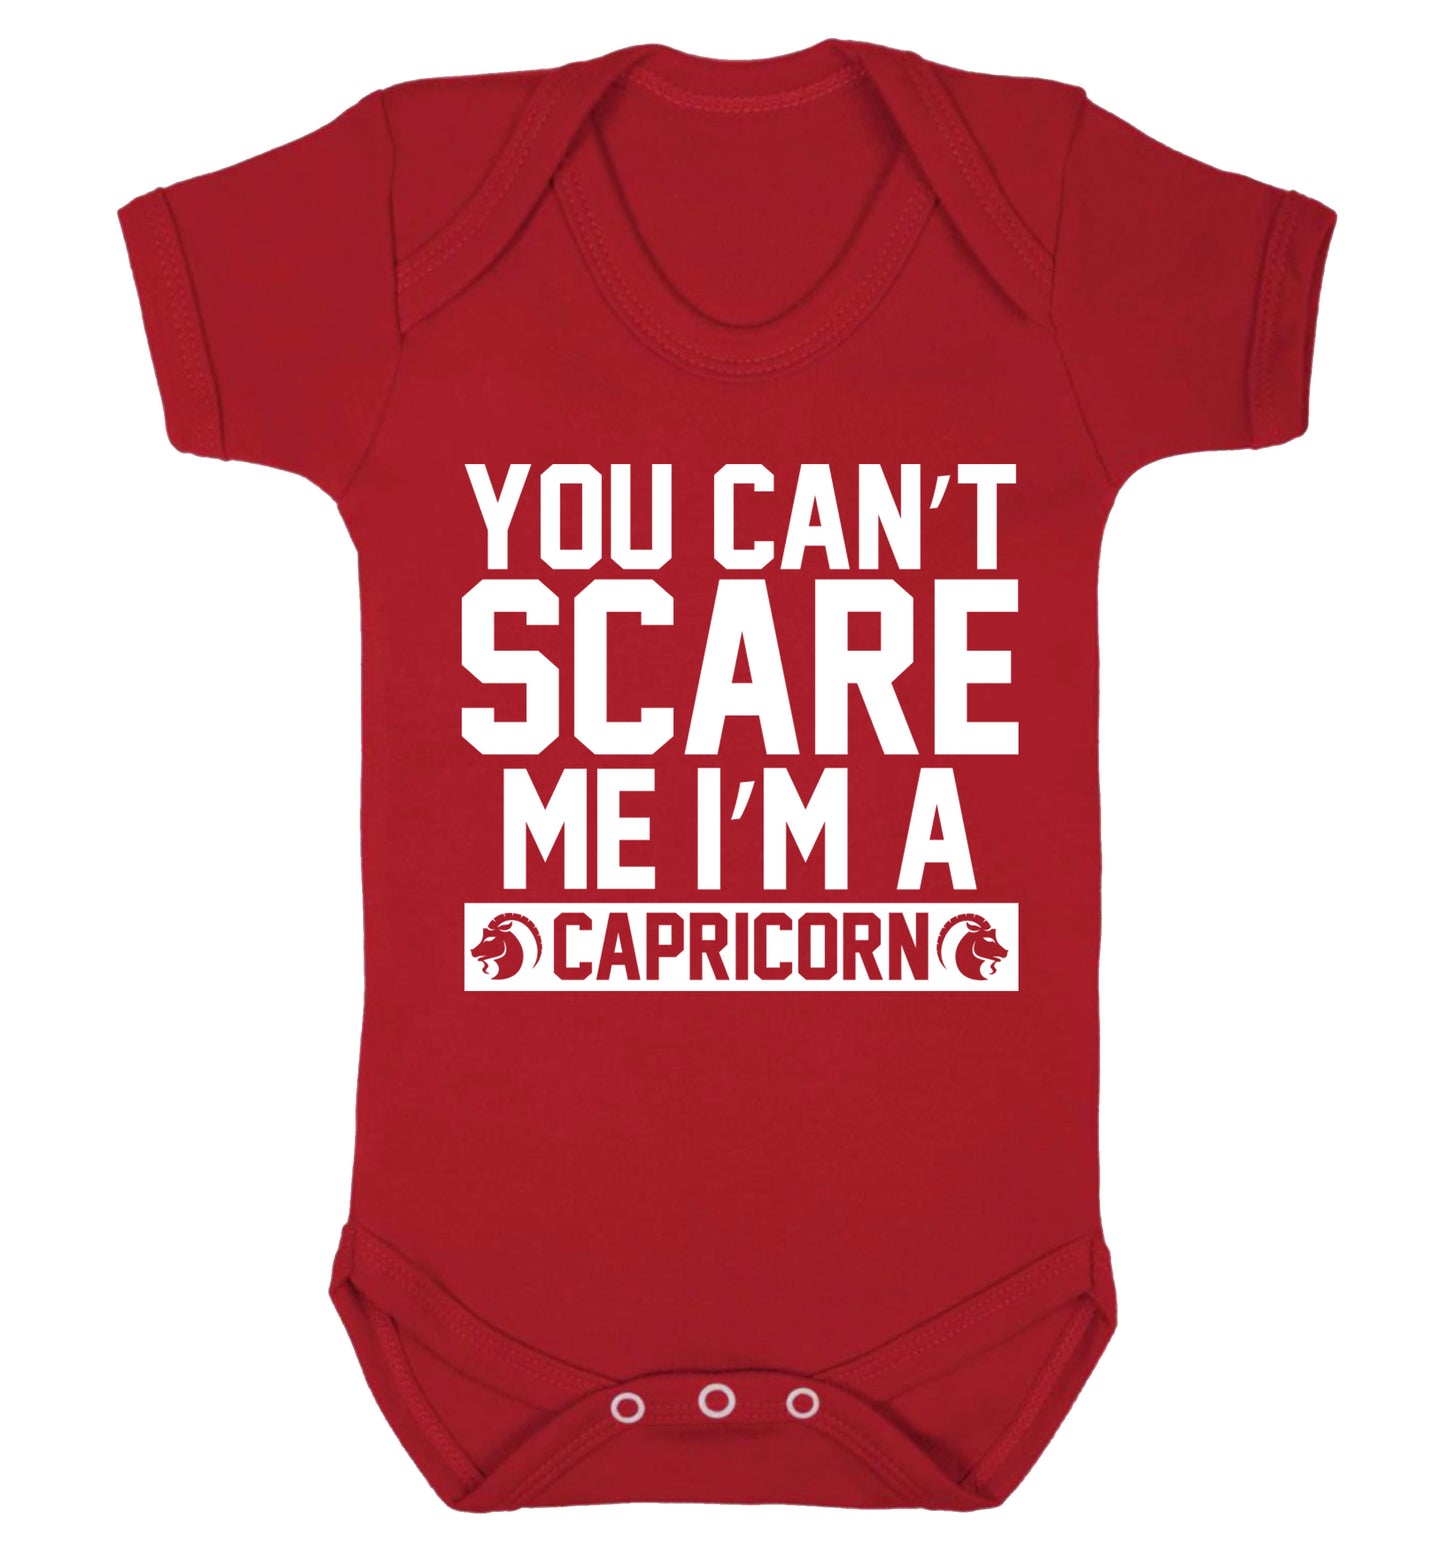 You can't scare me I'm a capricorn Baby Vest red 18-24 months